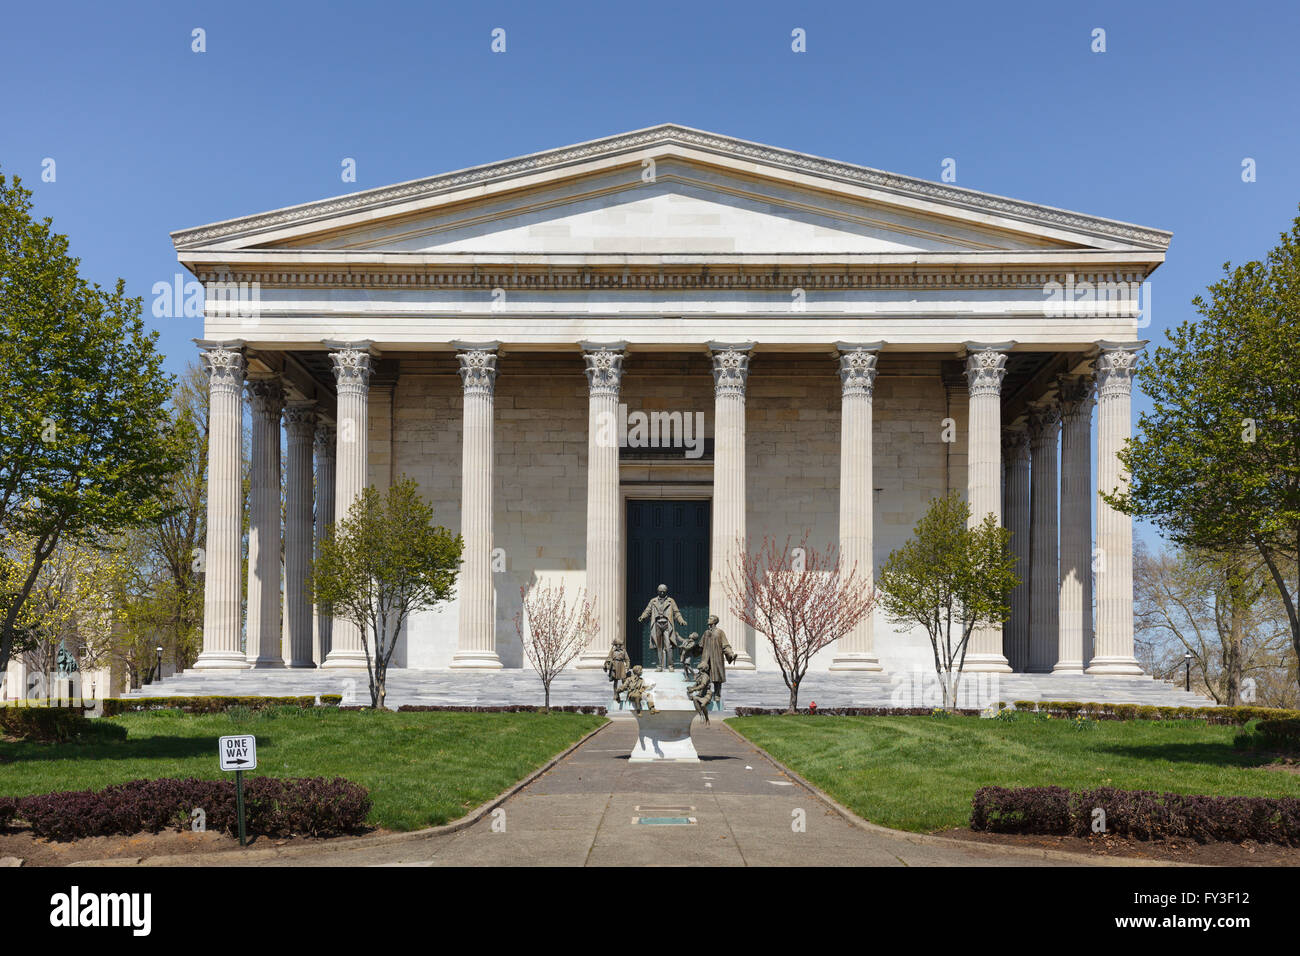 Founder’s Hall, Girard College, considered one of the finest examples of American Greek-Revival architecture. Philadelphia, Penn Stock Photo